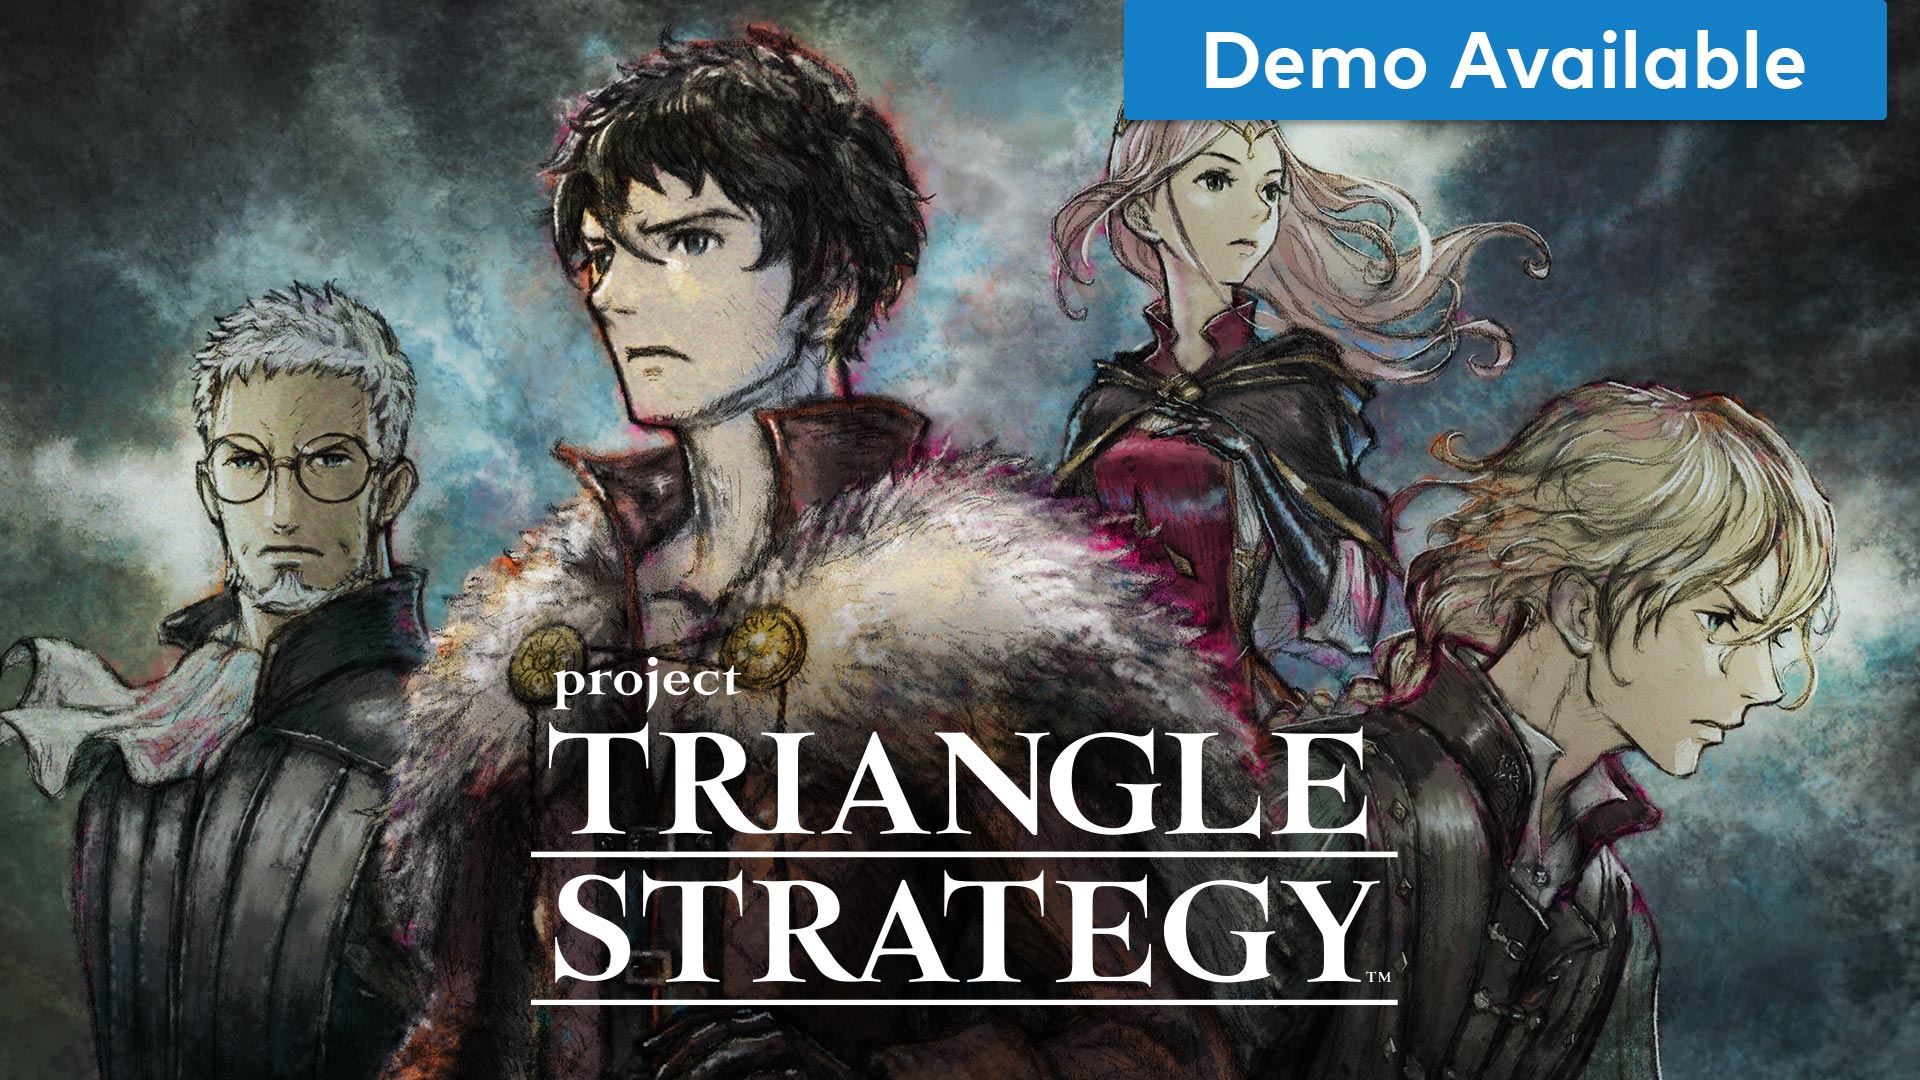 Project TRIANGLE STRATEGYÔäó (working title) Debut Demo